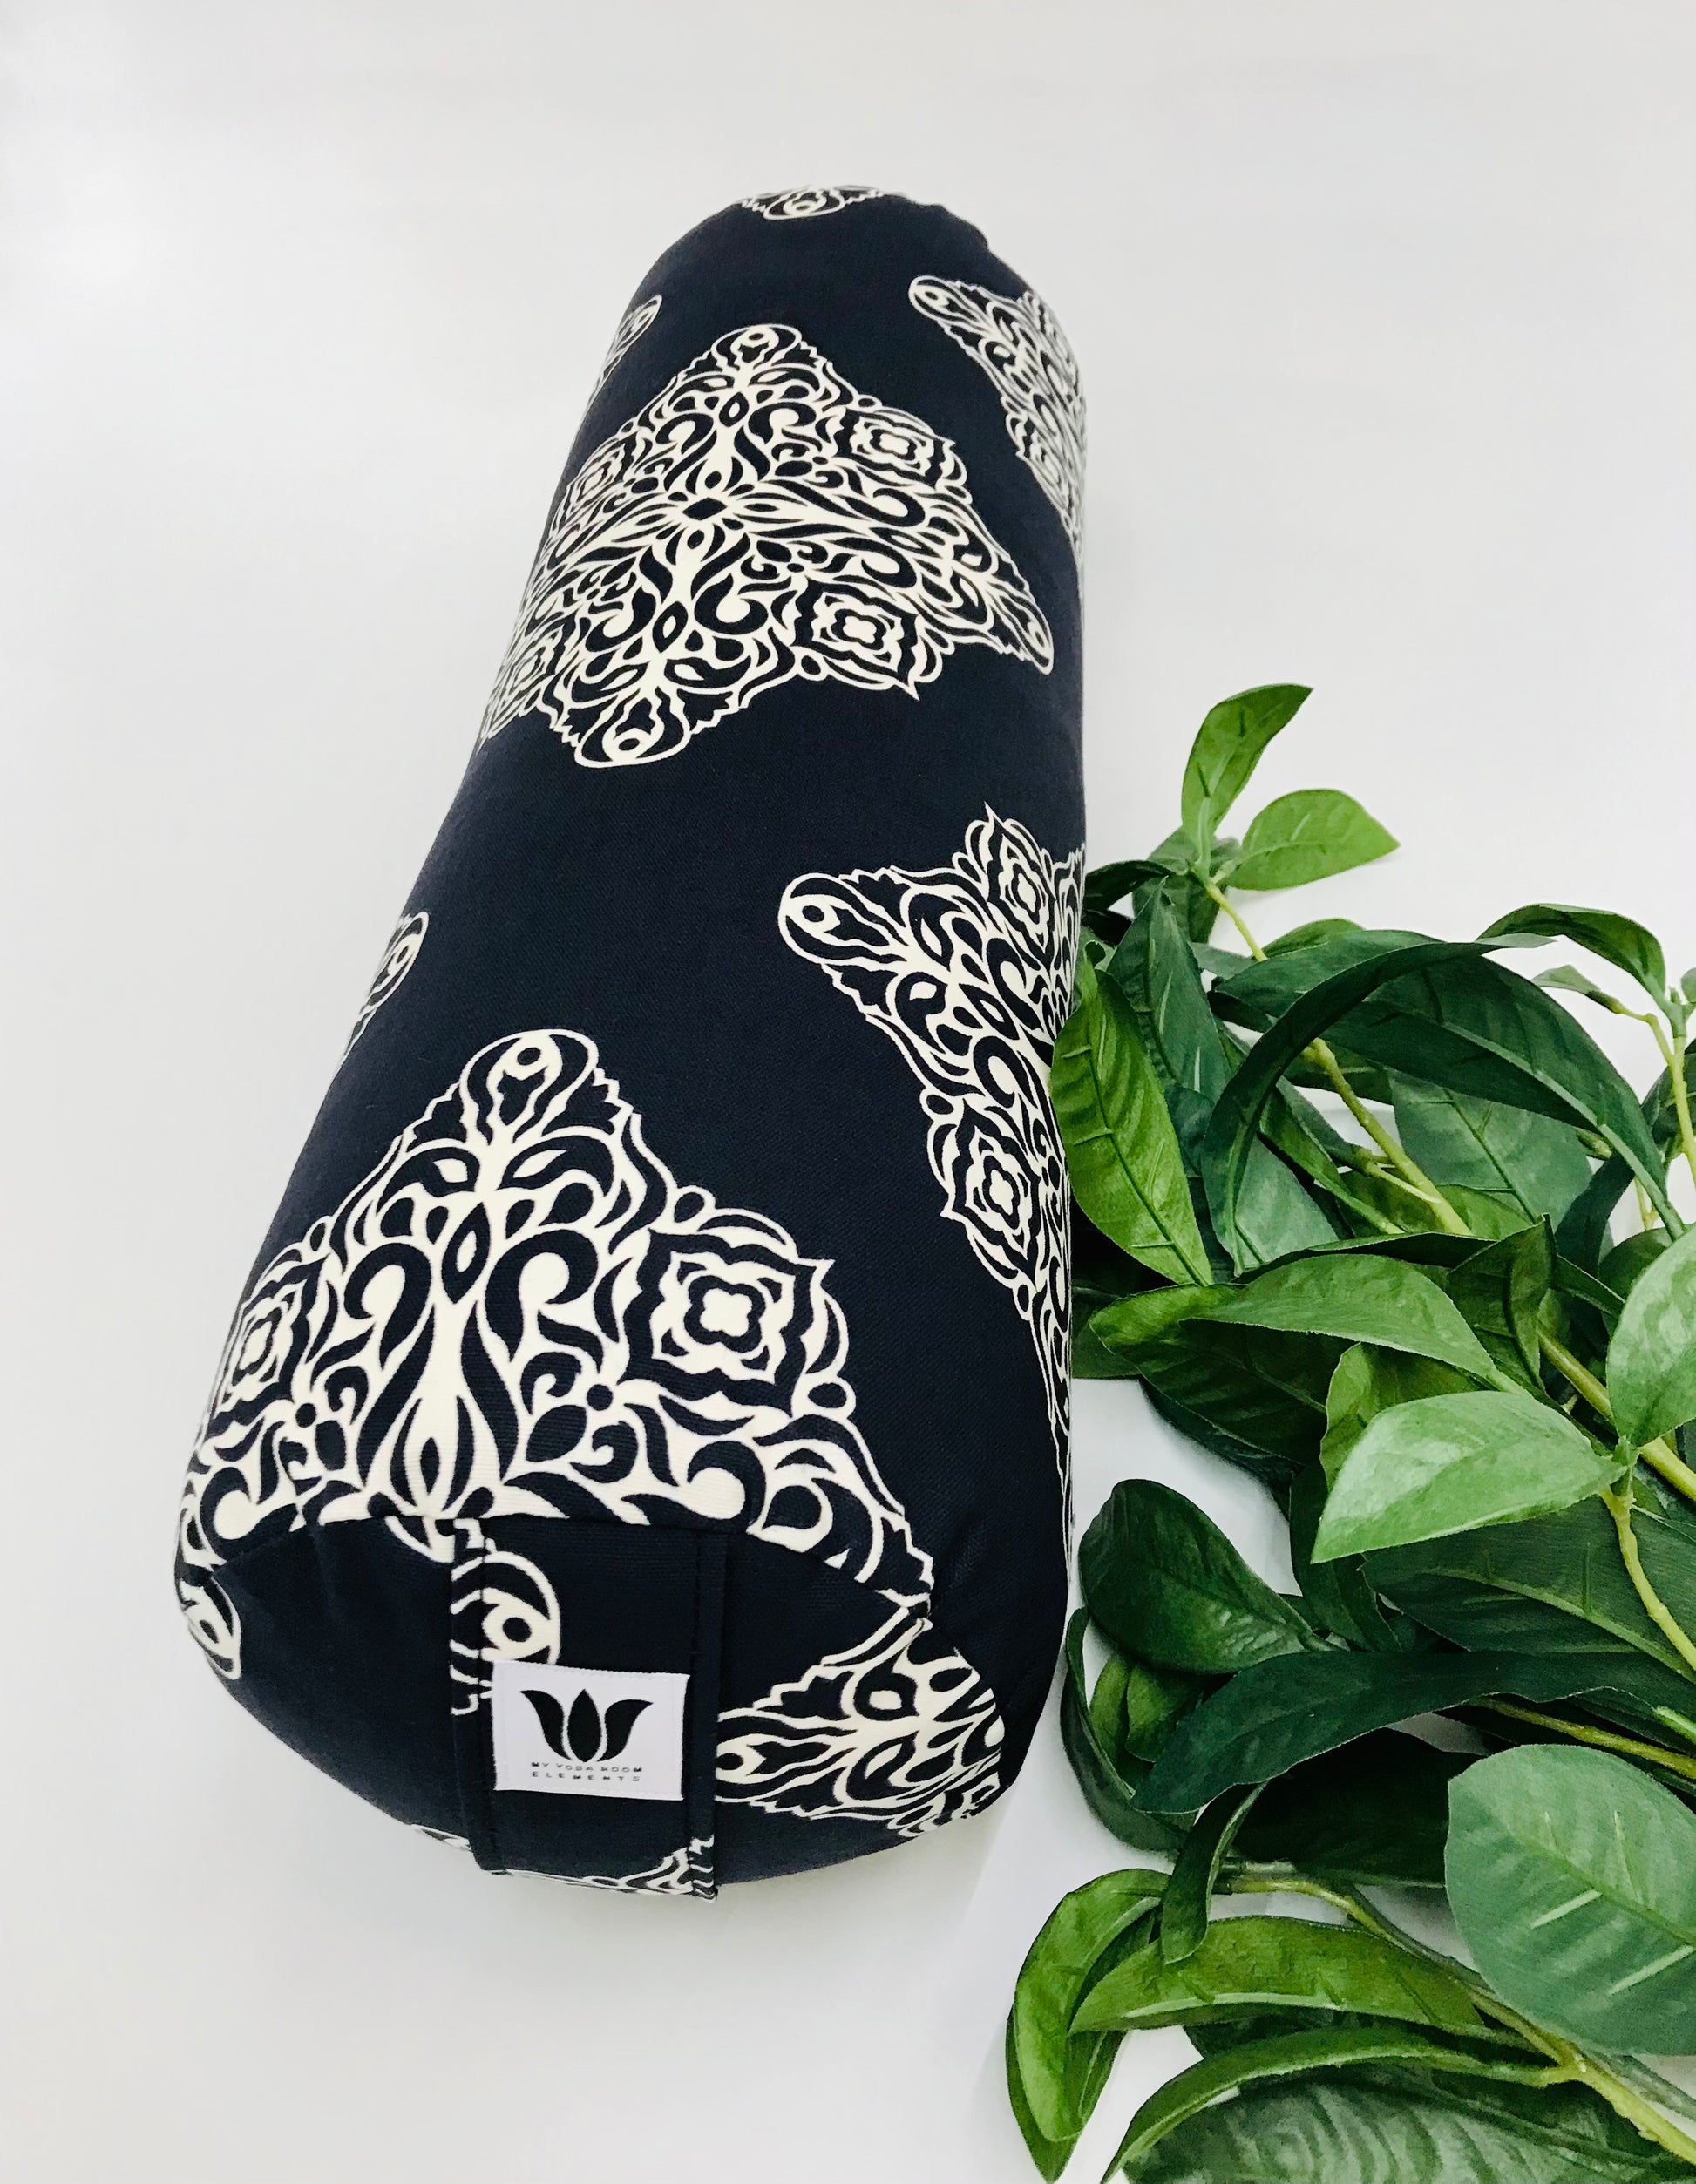 Round yoga bolster in blue and white modern mandala print fabric. Allergy conscious fill with removeable cover. Made in Canada by My Yoga Room Elements